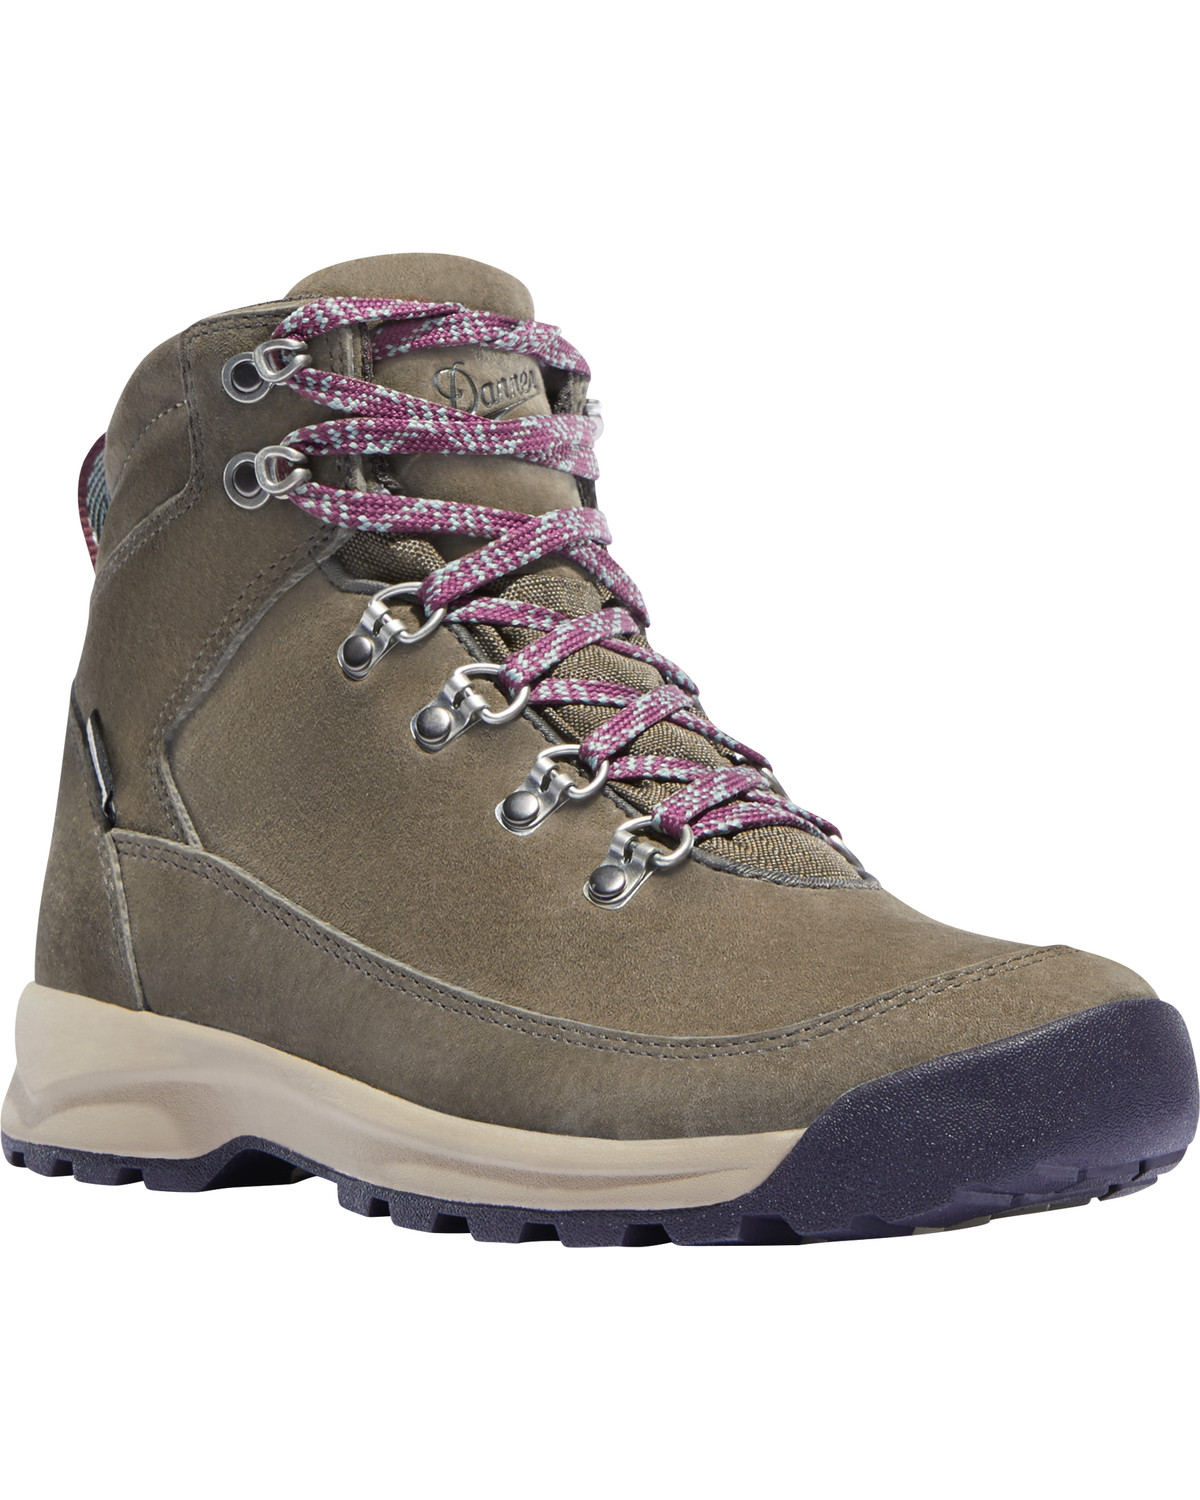 Danner Women's Adrika Hiker Lace-Up Boots - Round Toe